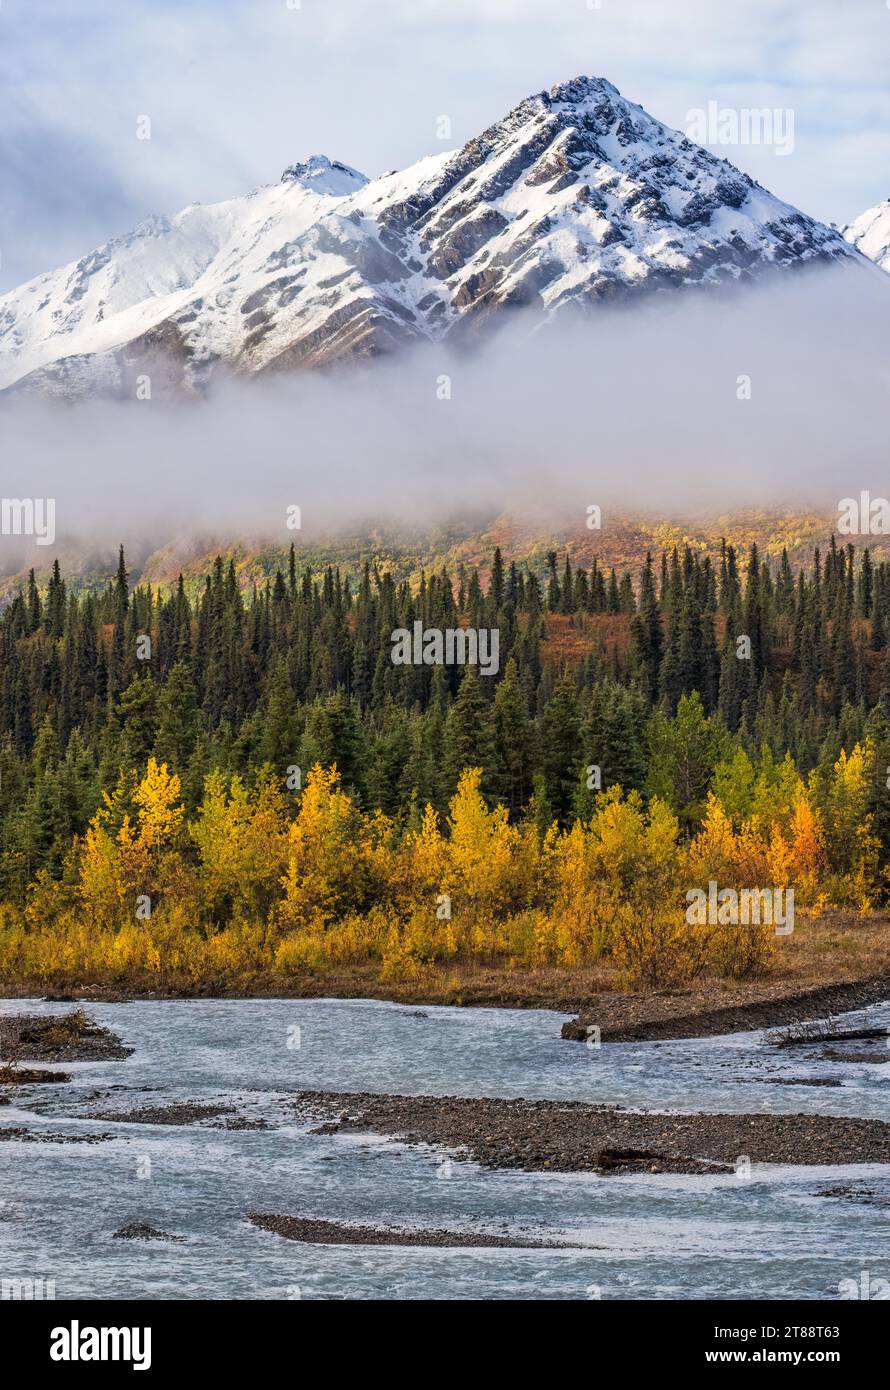 The seasons collide in Denali national park, with fall color, fog and snow all combining above the river in Denali National Park, Alaska. Stock Photo